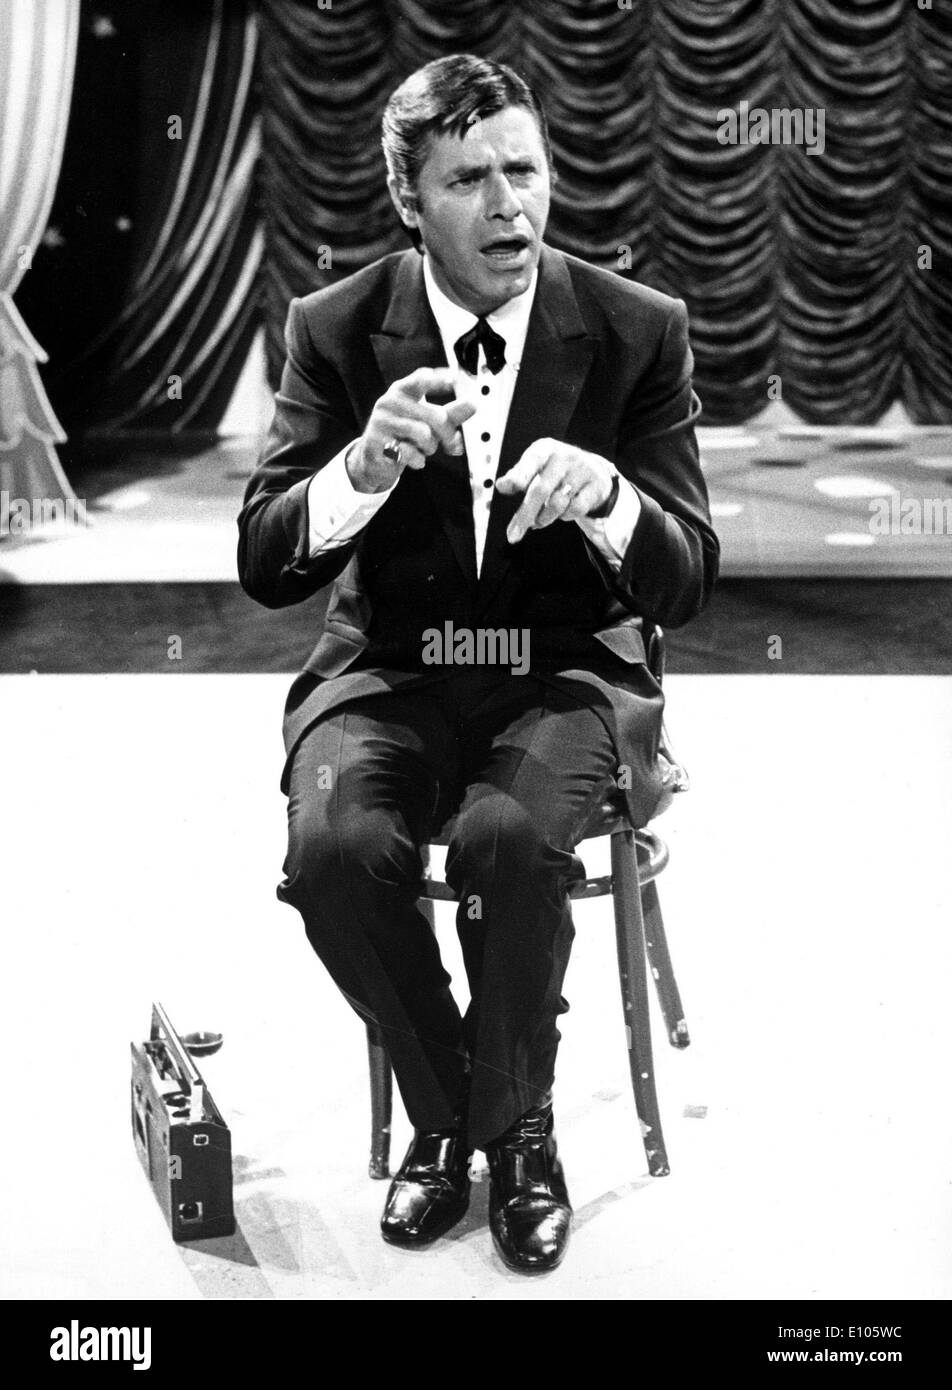 Comedian actor Jerry Lewis performing comedy Stock Photo